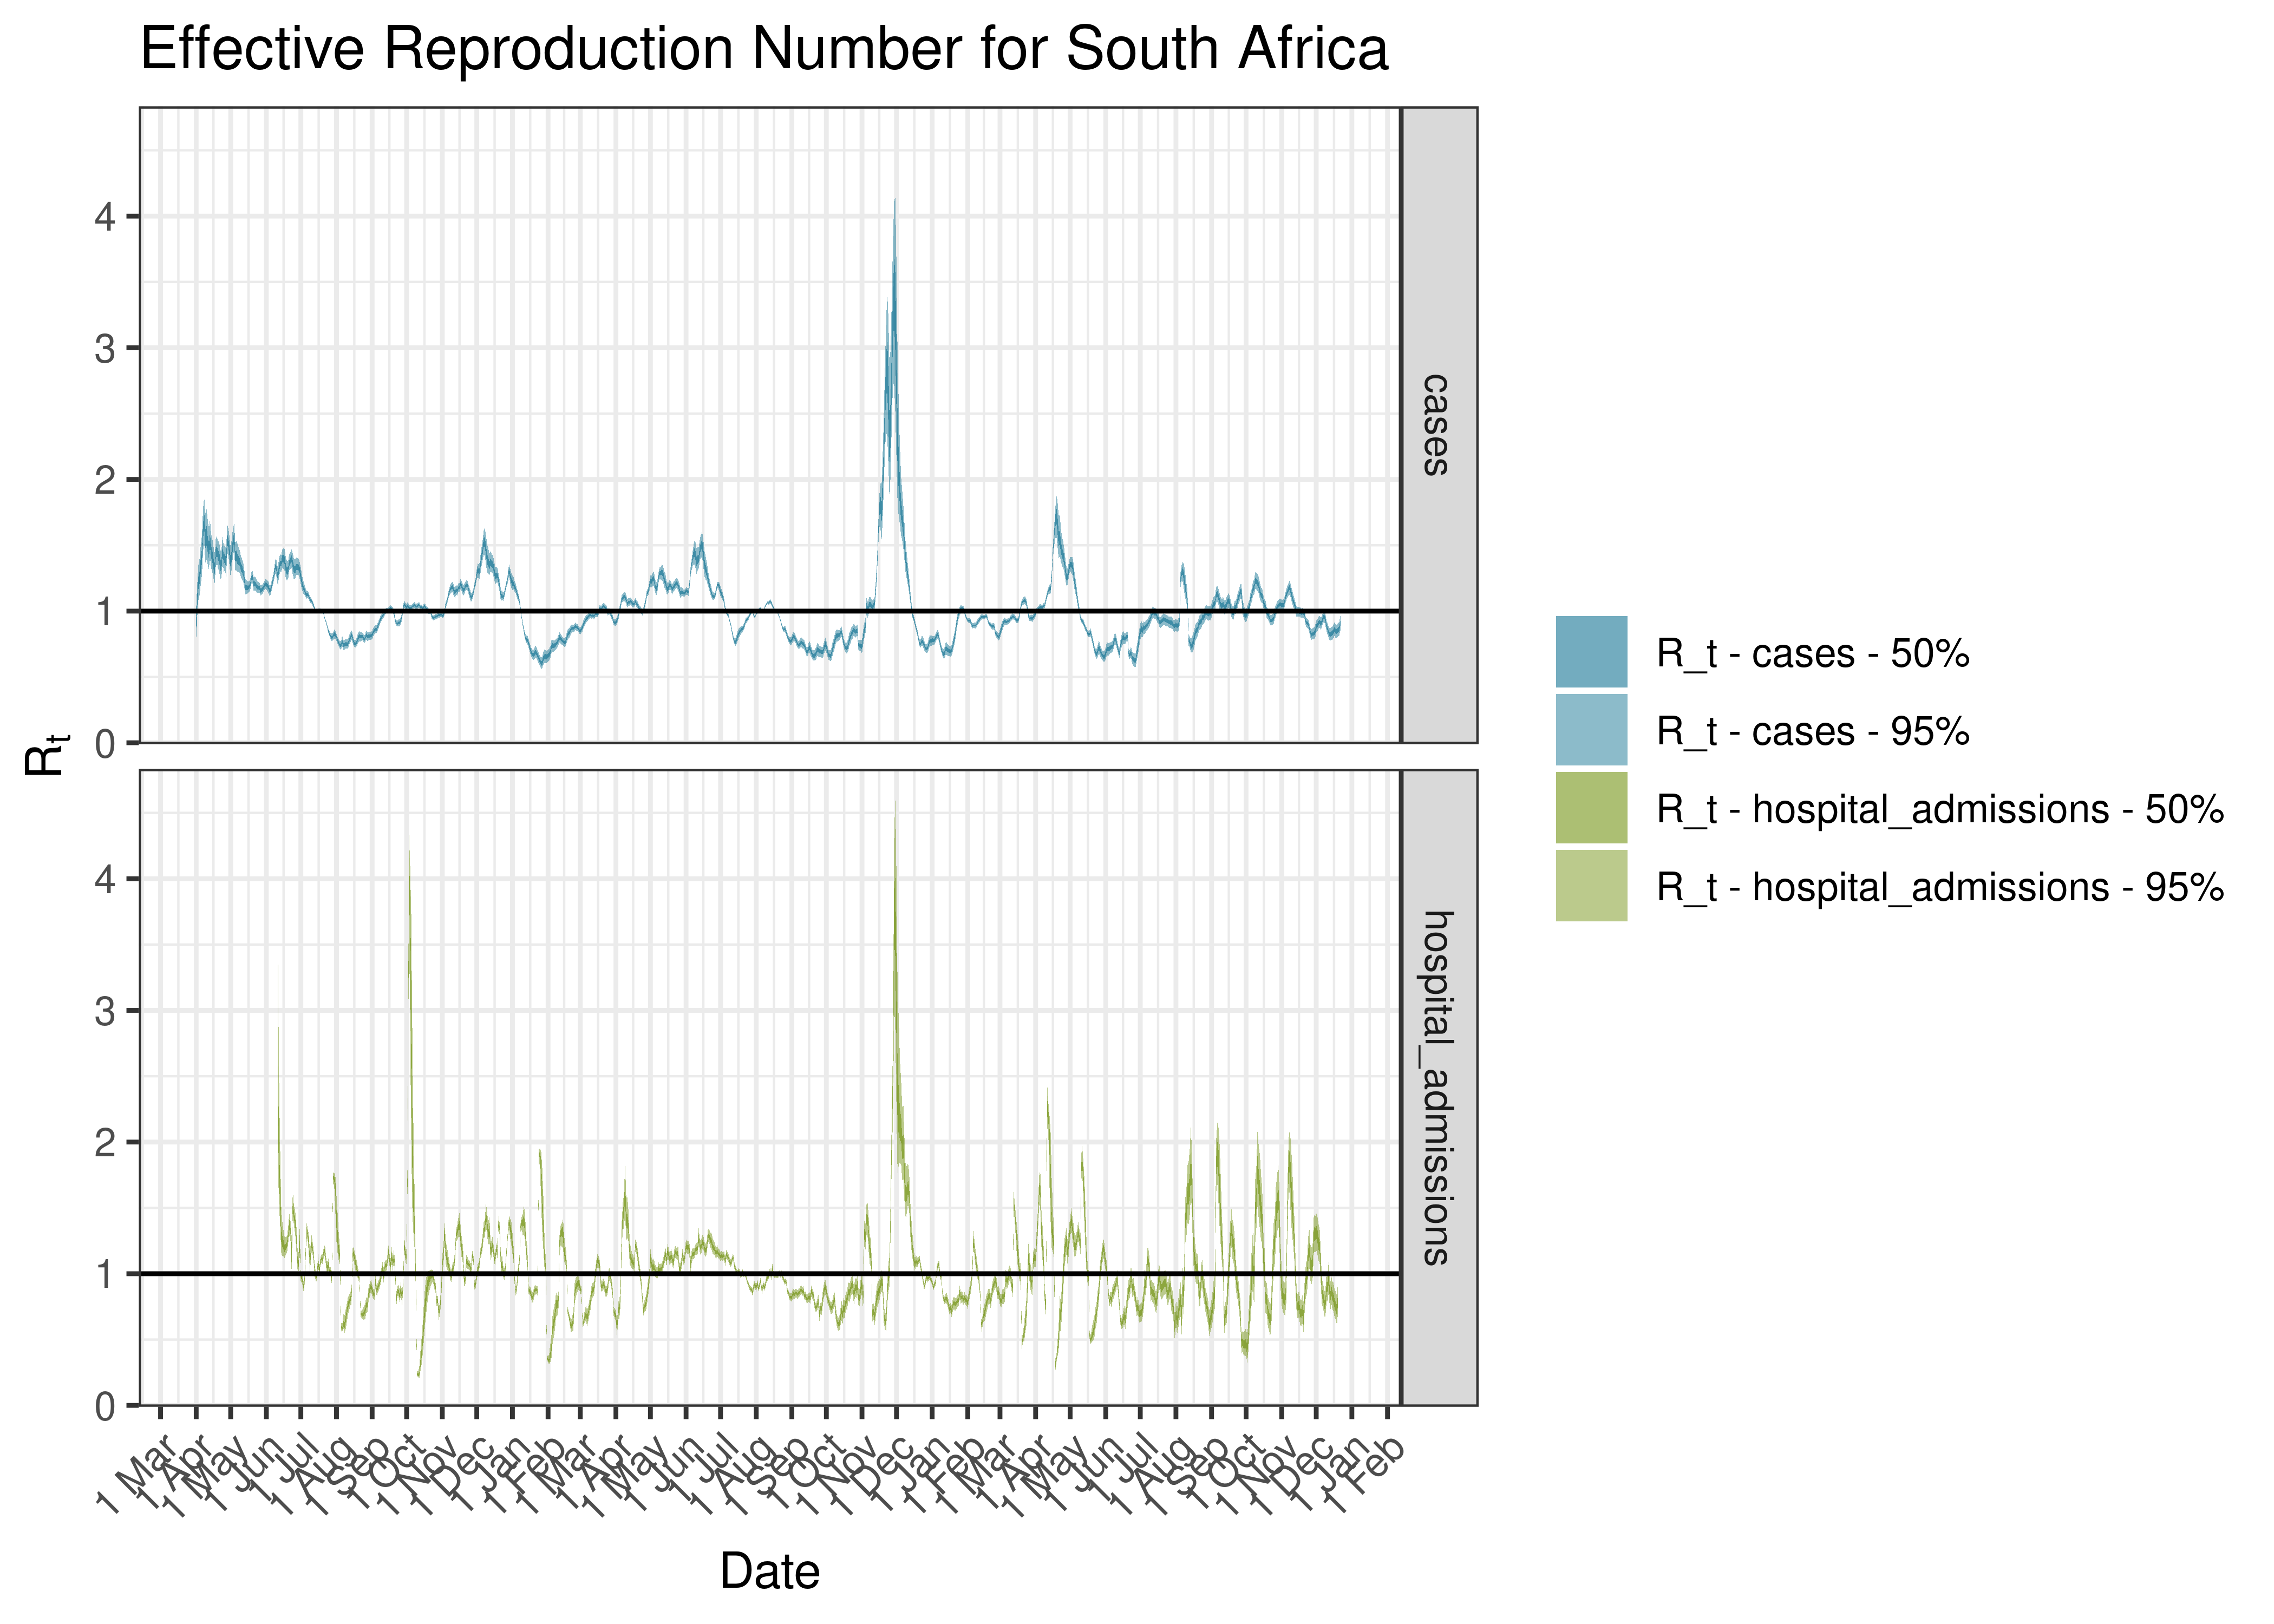 Estimated Effective Reproduction Number for South Africa since 1 April 2020